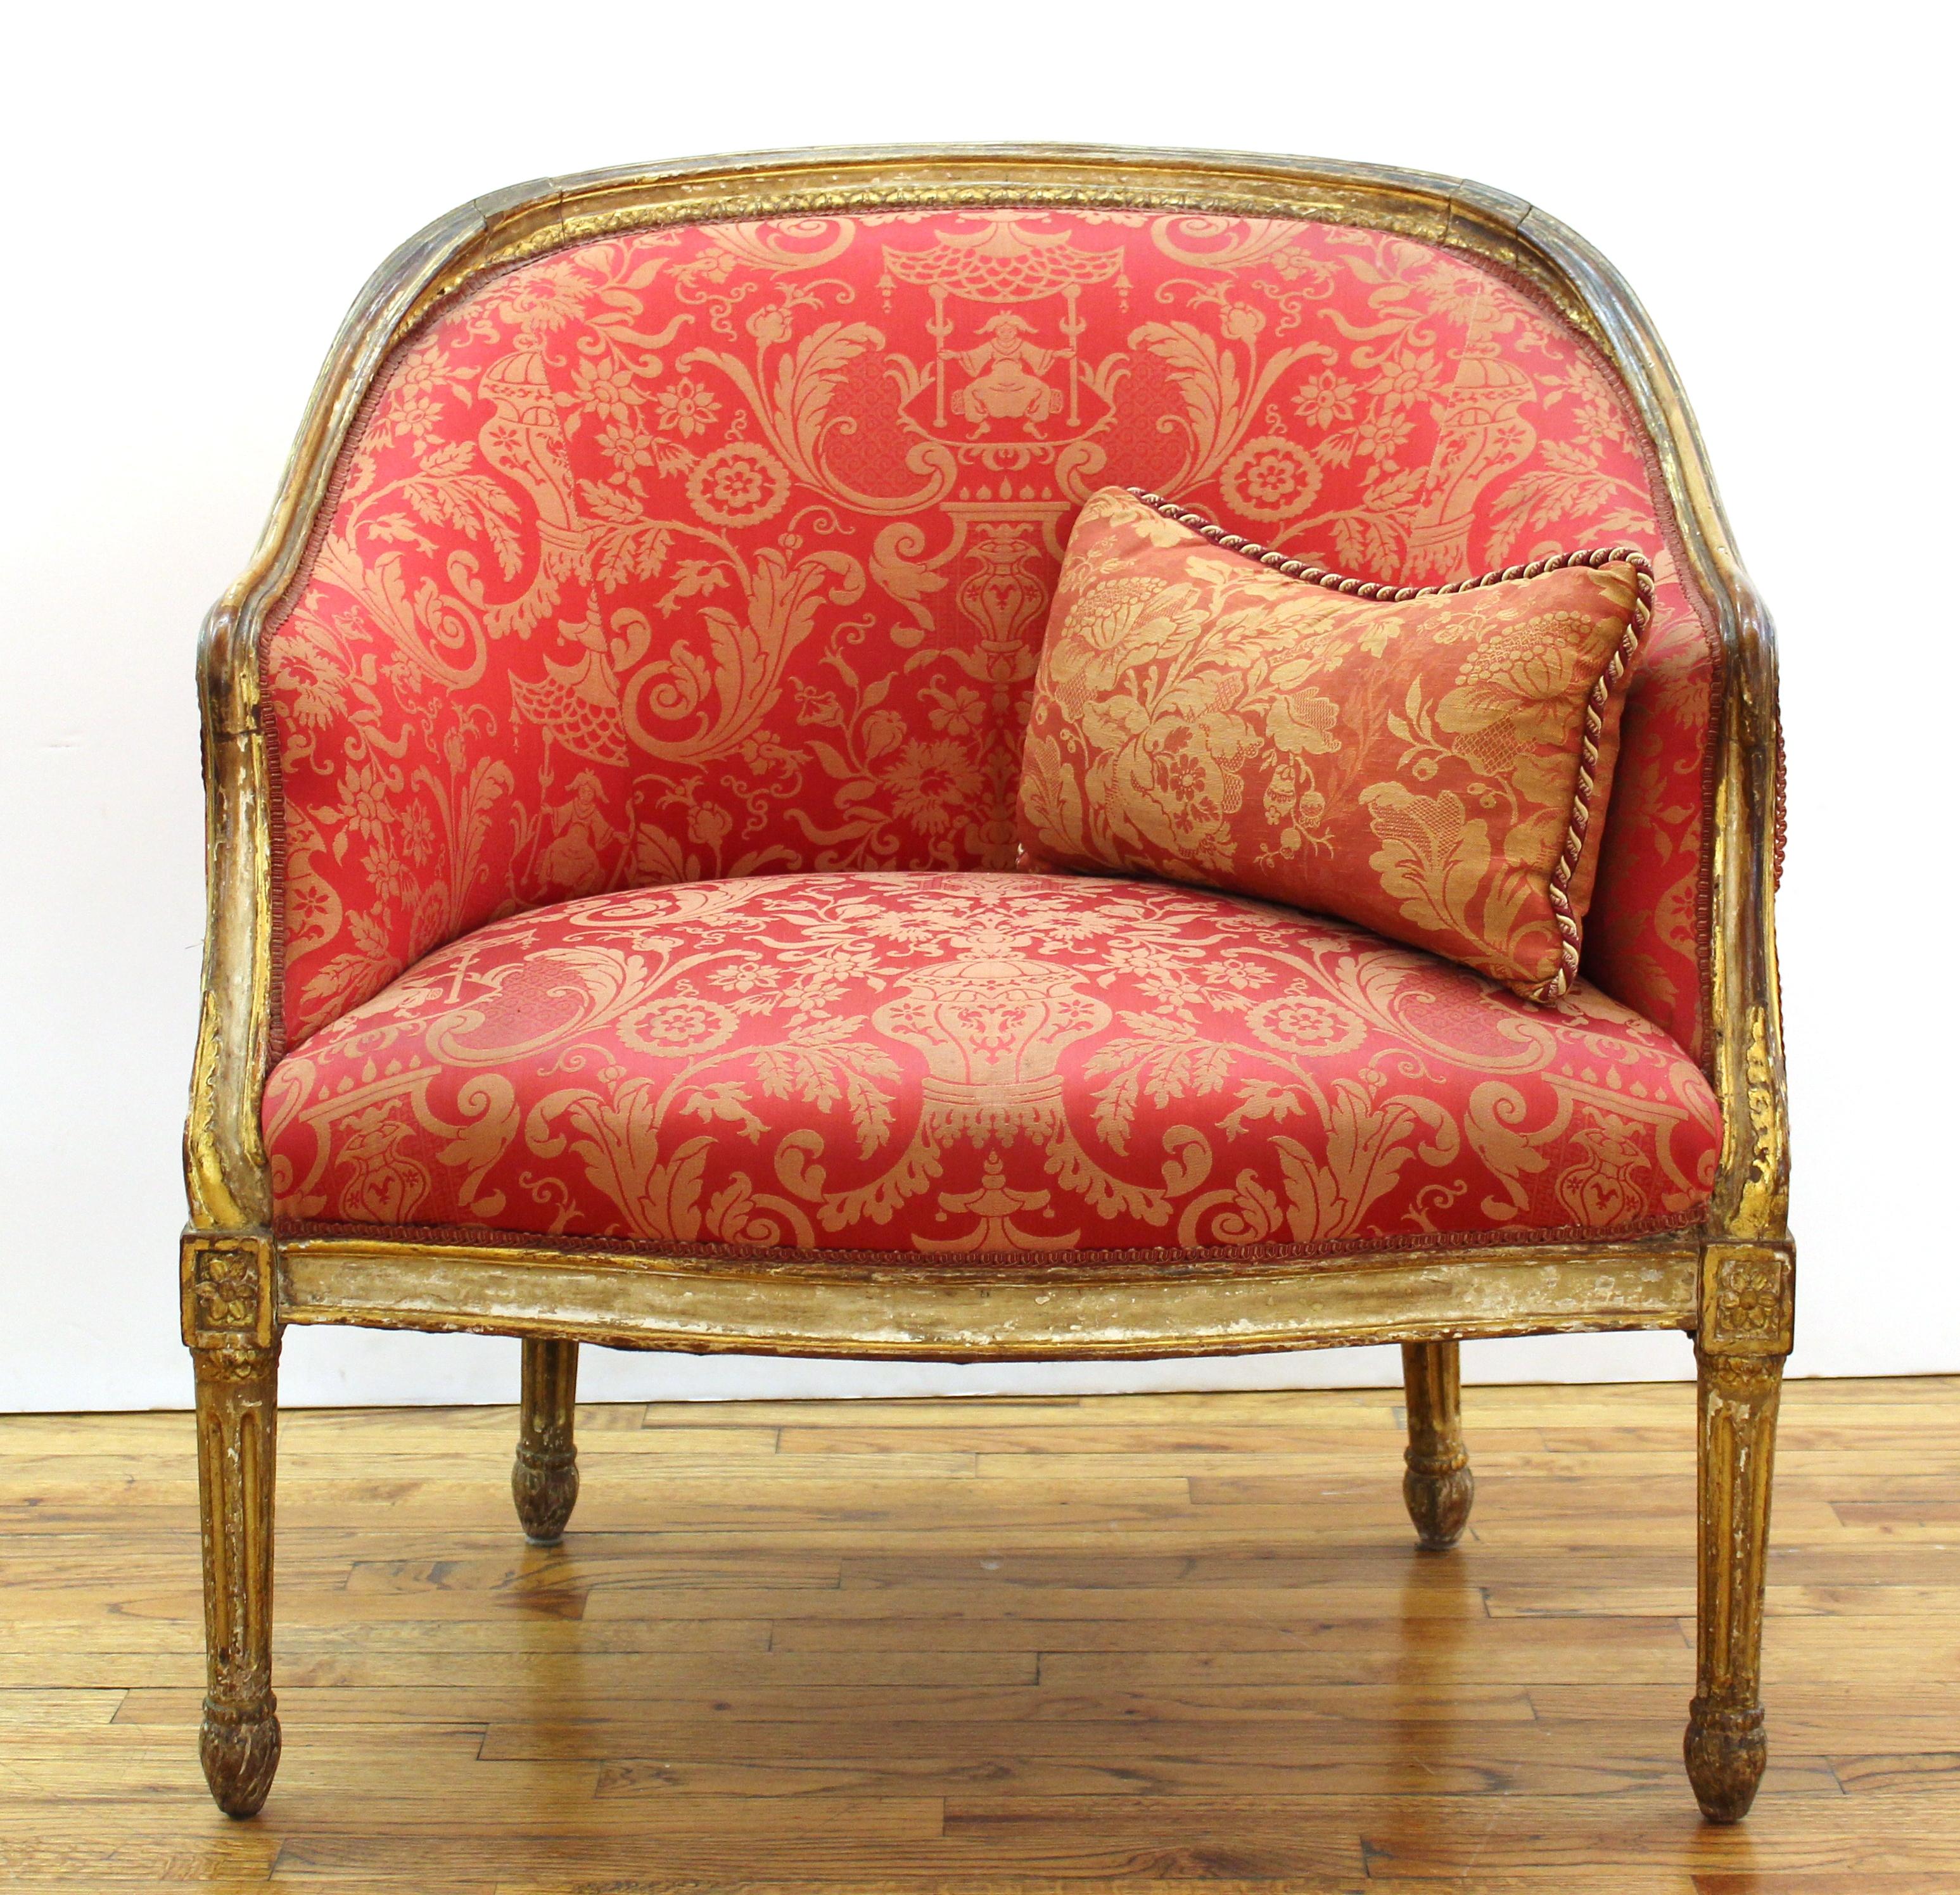 French Louis XVI style fauteuil with carved giltwood frame and damask upholstery, with small cushion.